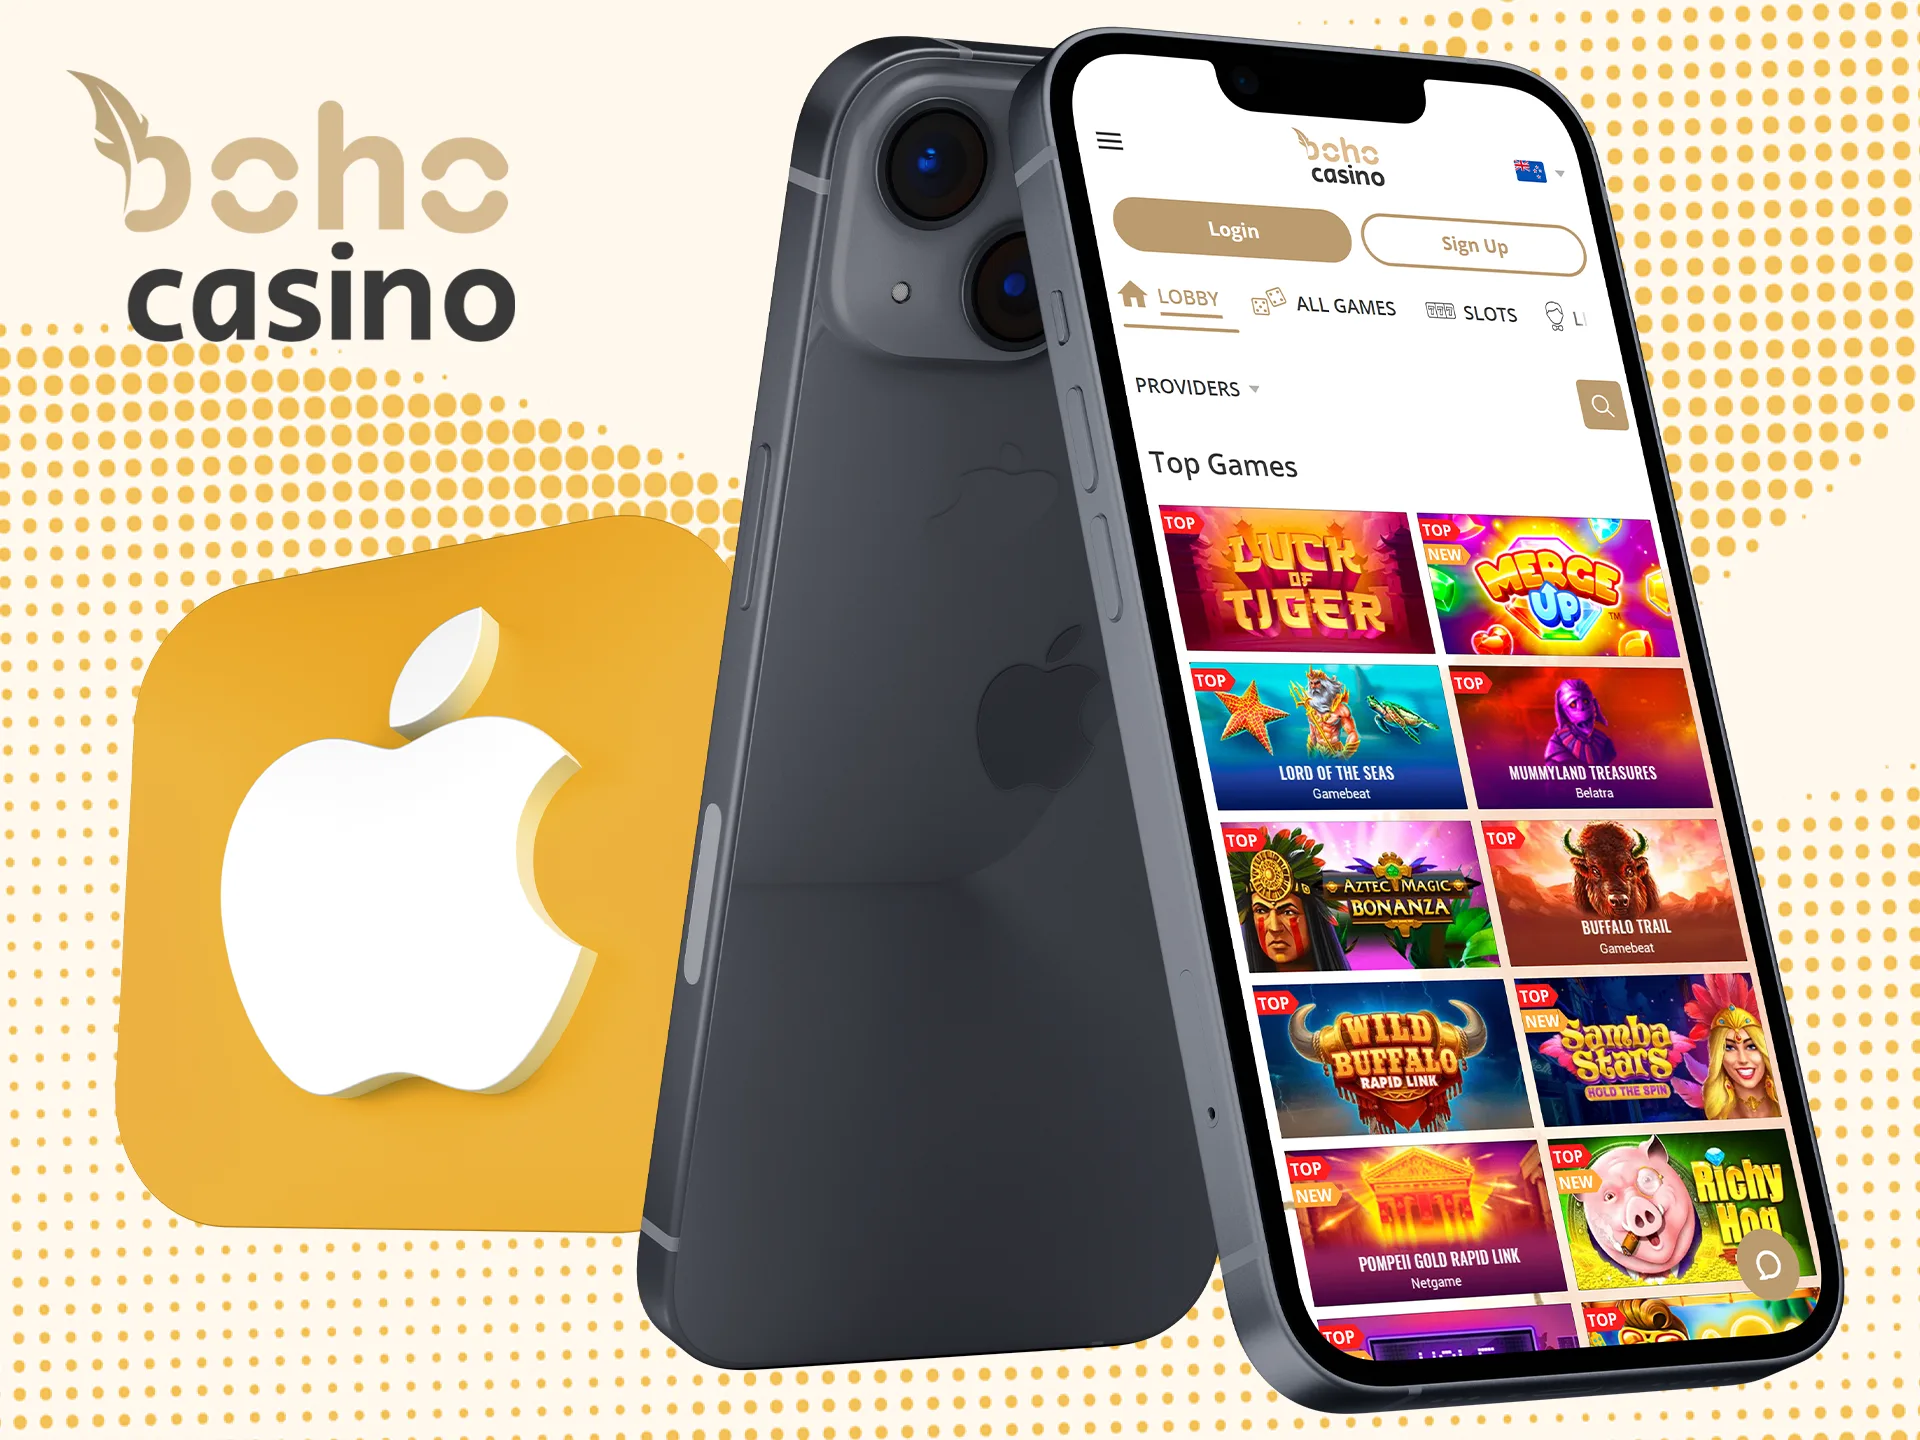 The mobile version of Boho Casino is available for all iOS devices.